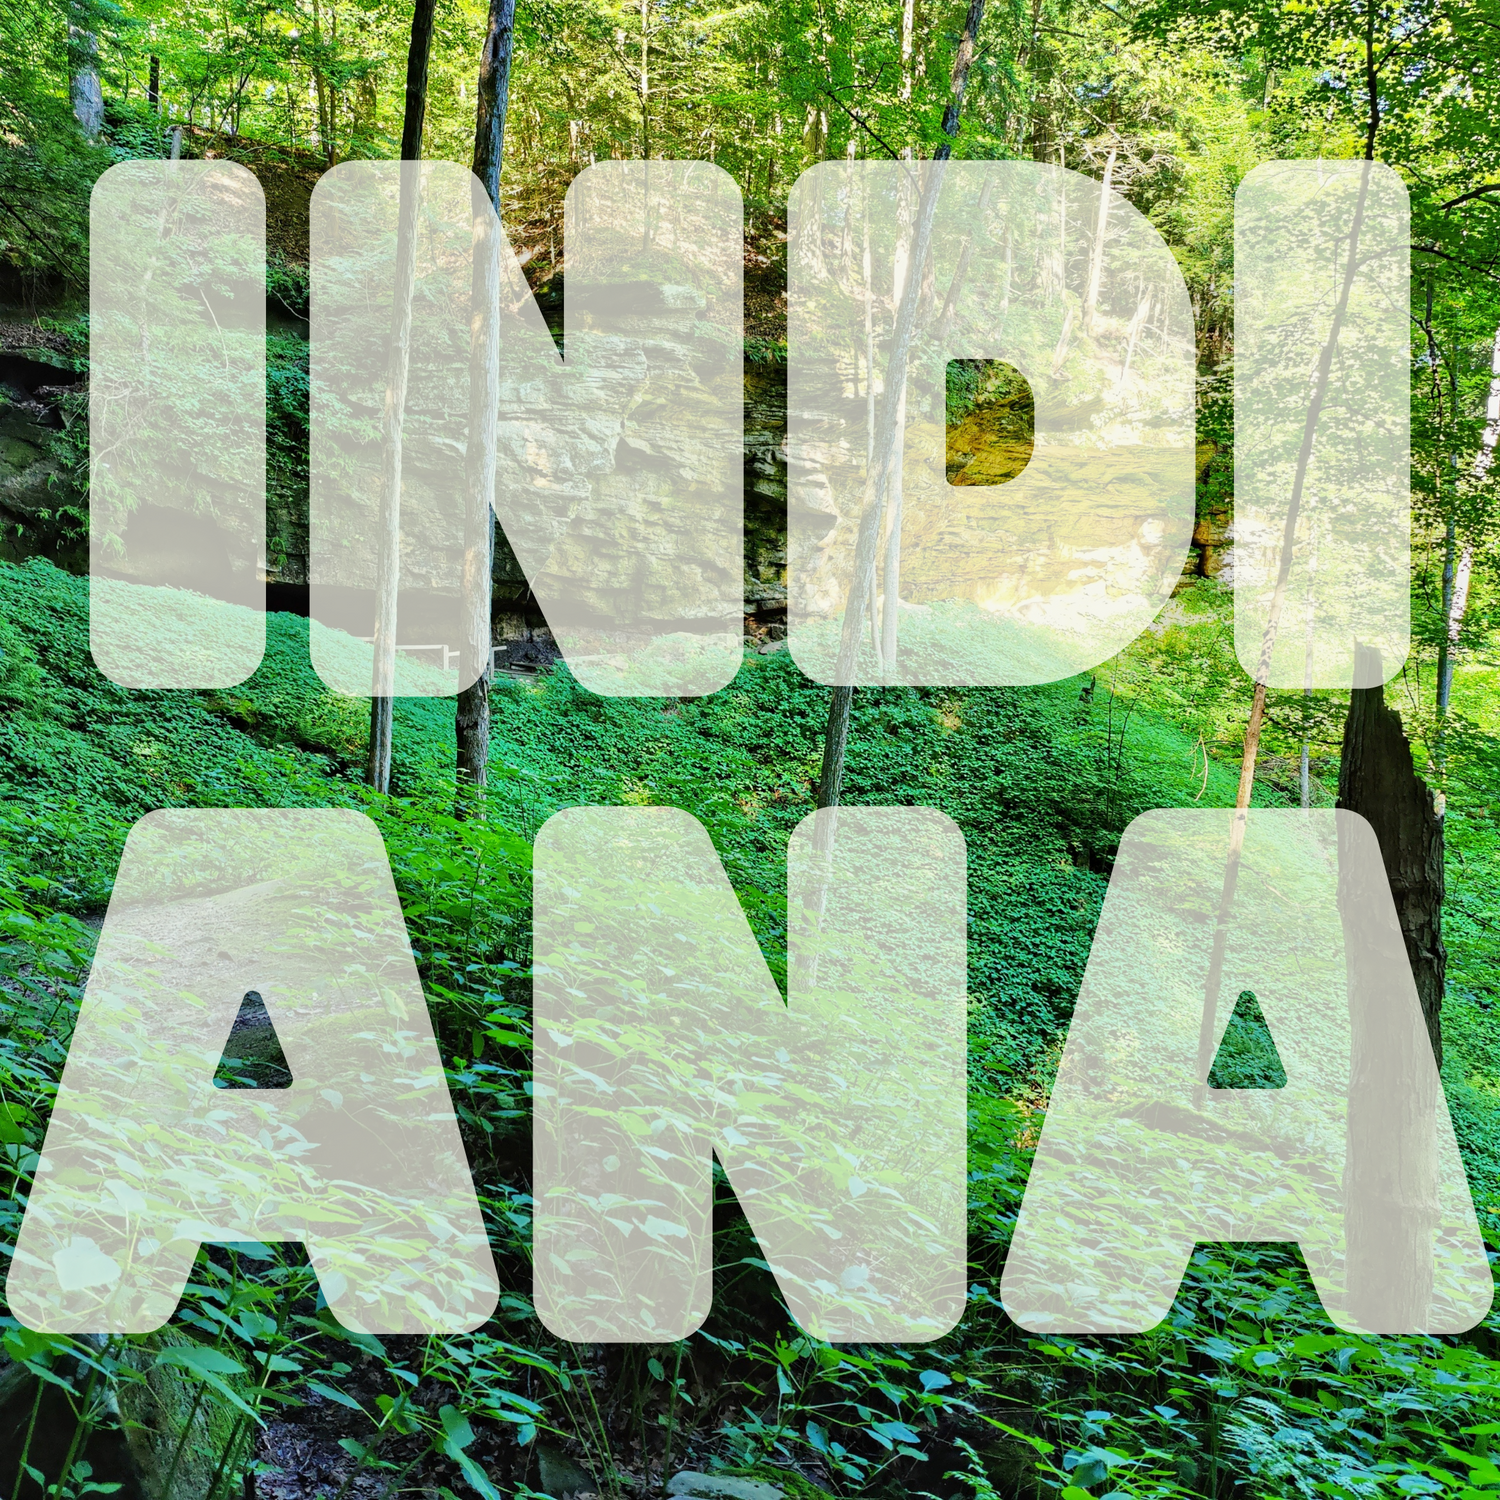 INDIANA Hiking Guide w/ @thehappyhours_